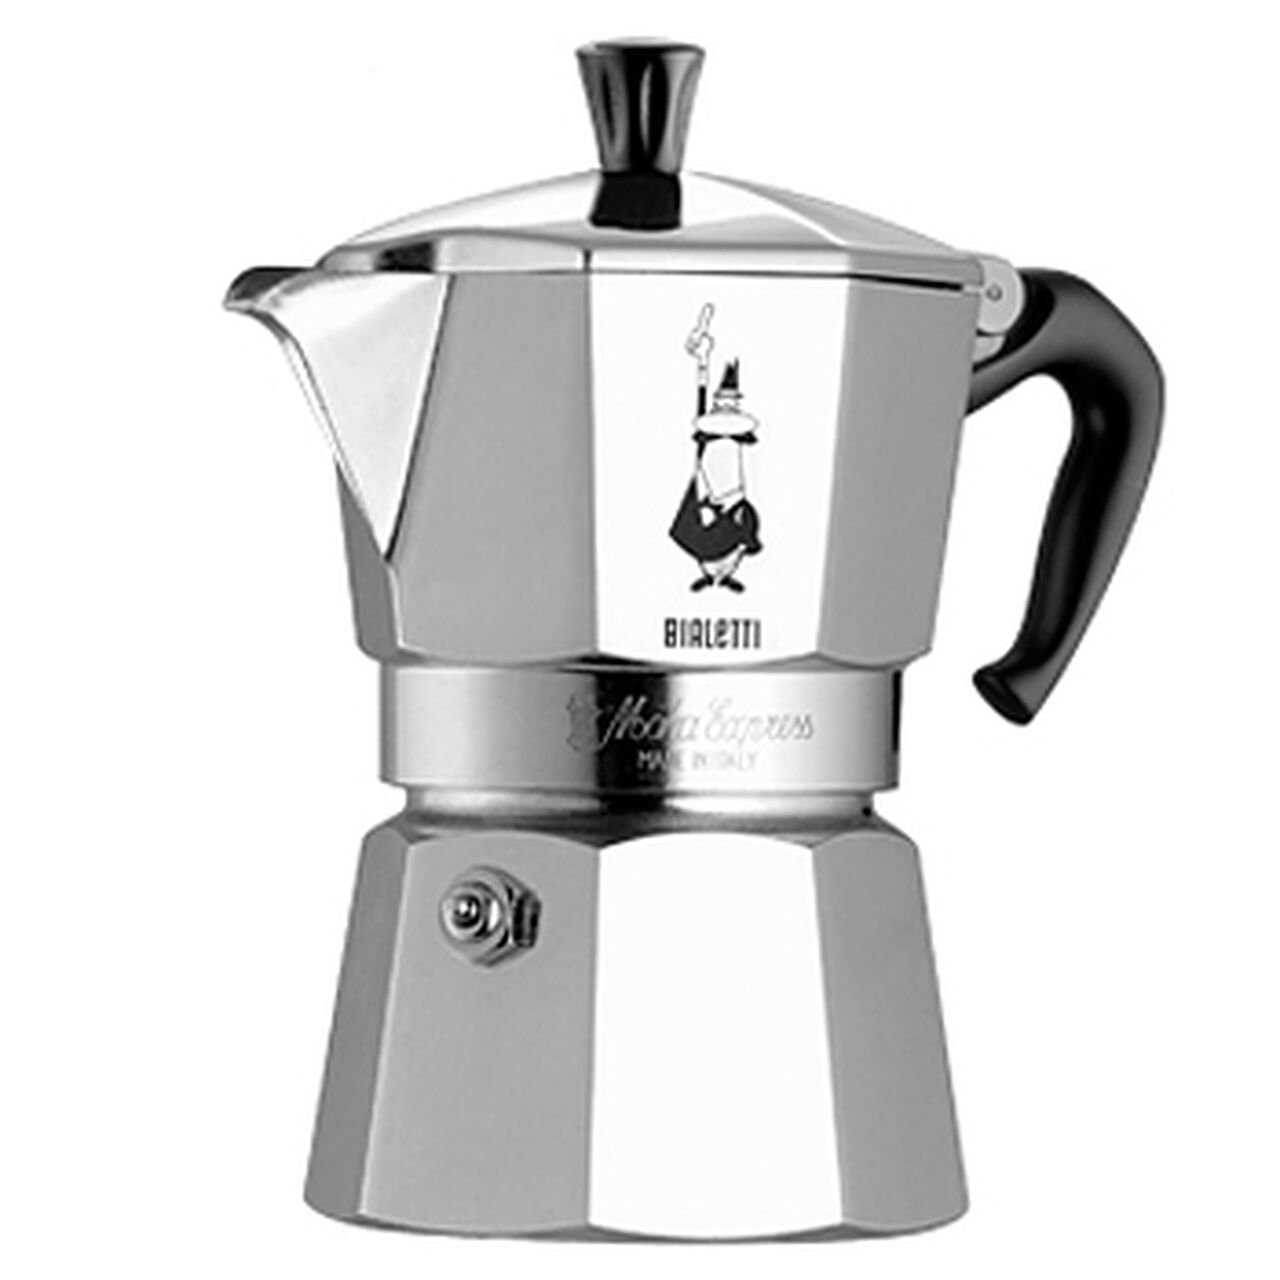 Bialetti Moka Express - 3 Cups Espresso Maker  #06799, , large image number 0